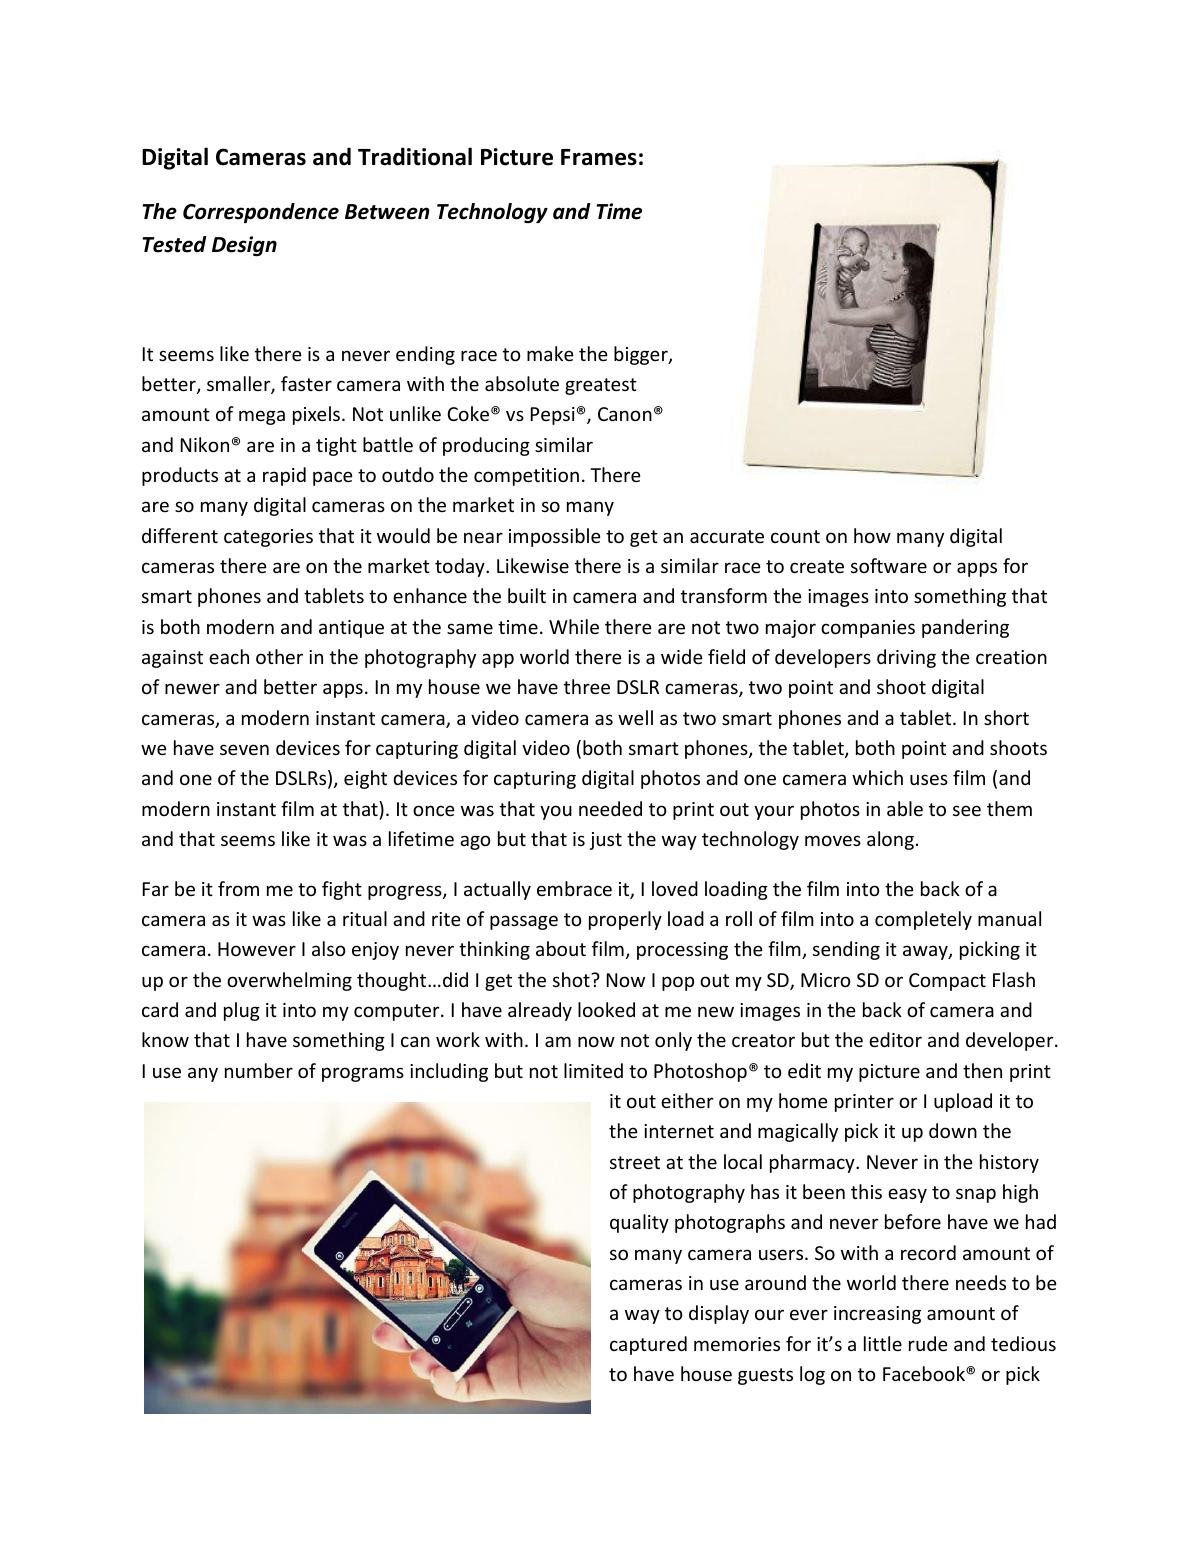 Digital Cameras and Picture Frames:The Correspondence Between Technology and Time Tested Design